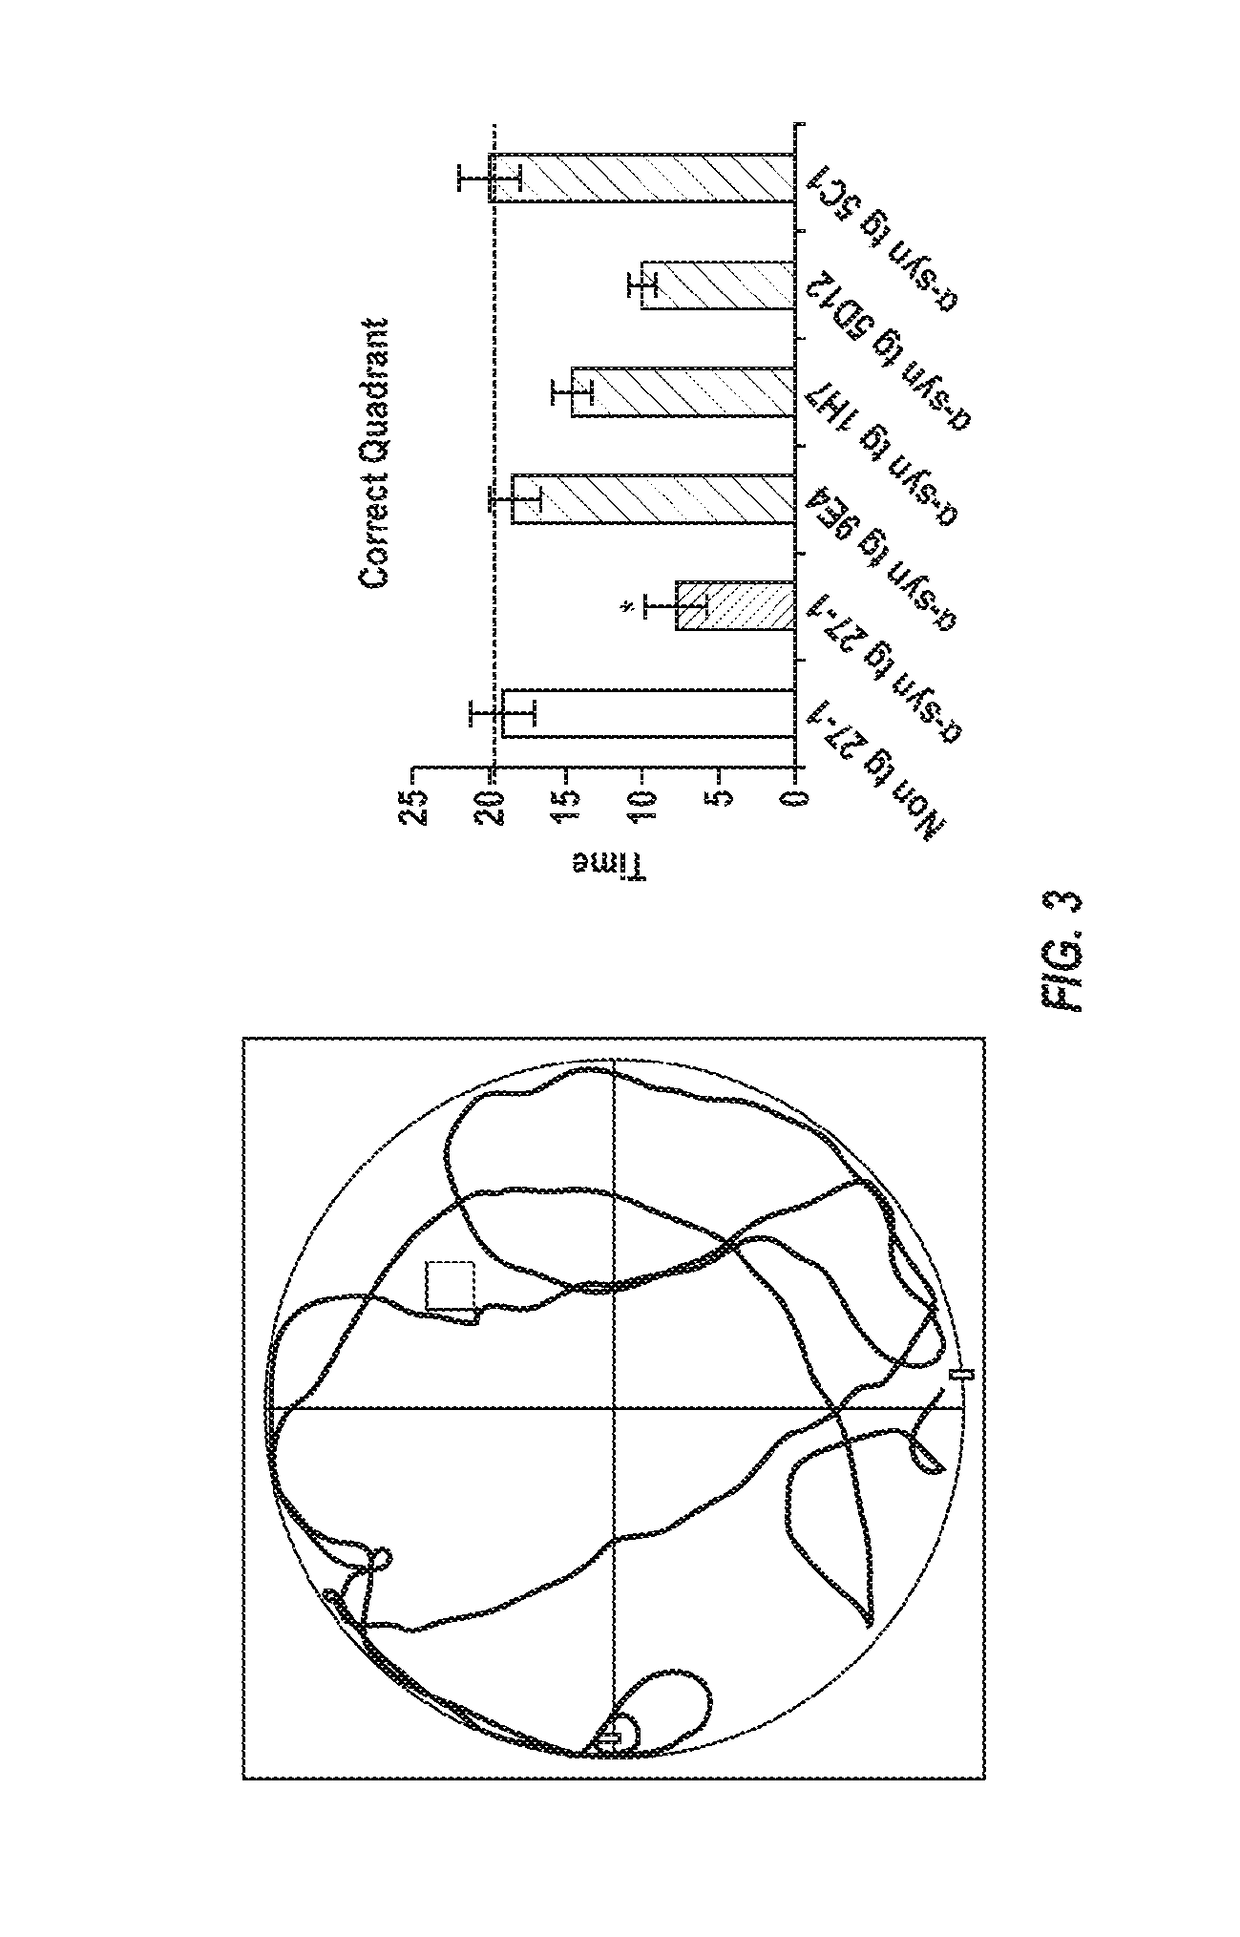 Blood-Brain Barrier Shuttles Containing Antibodies Recognizing Alpha-Synuclein